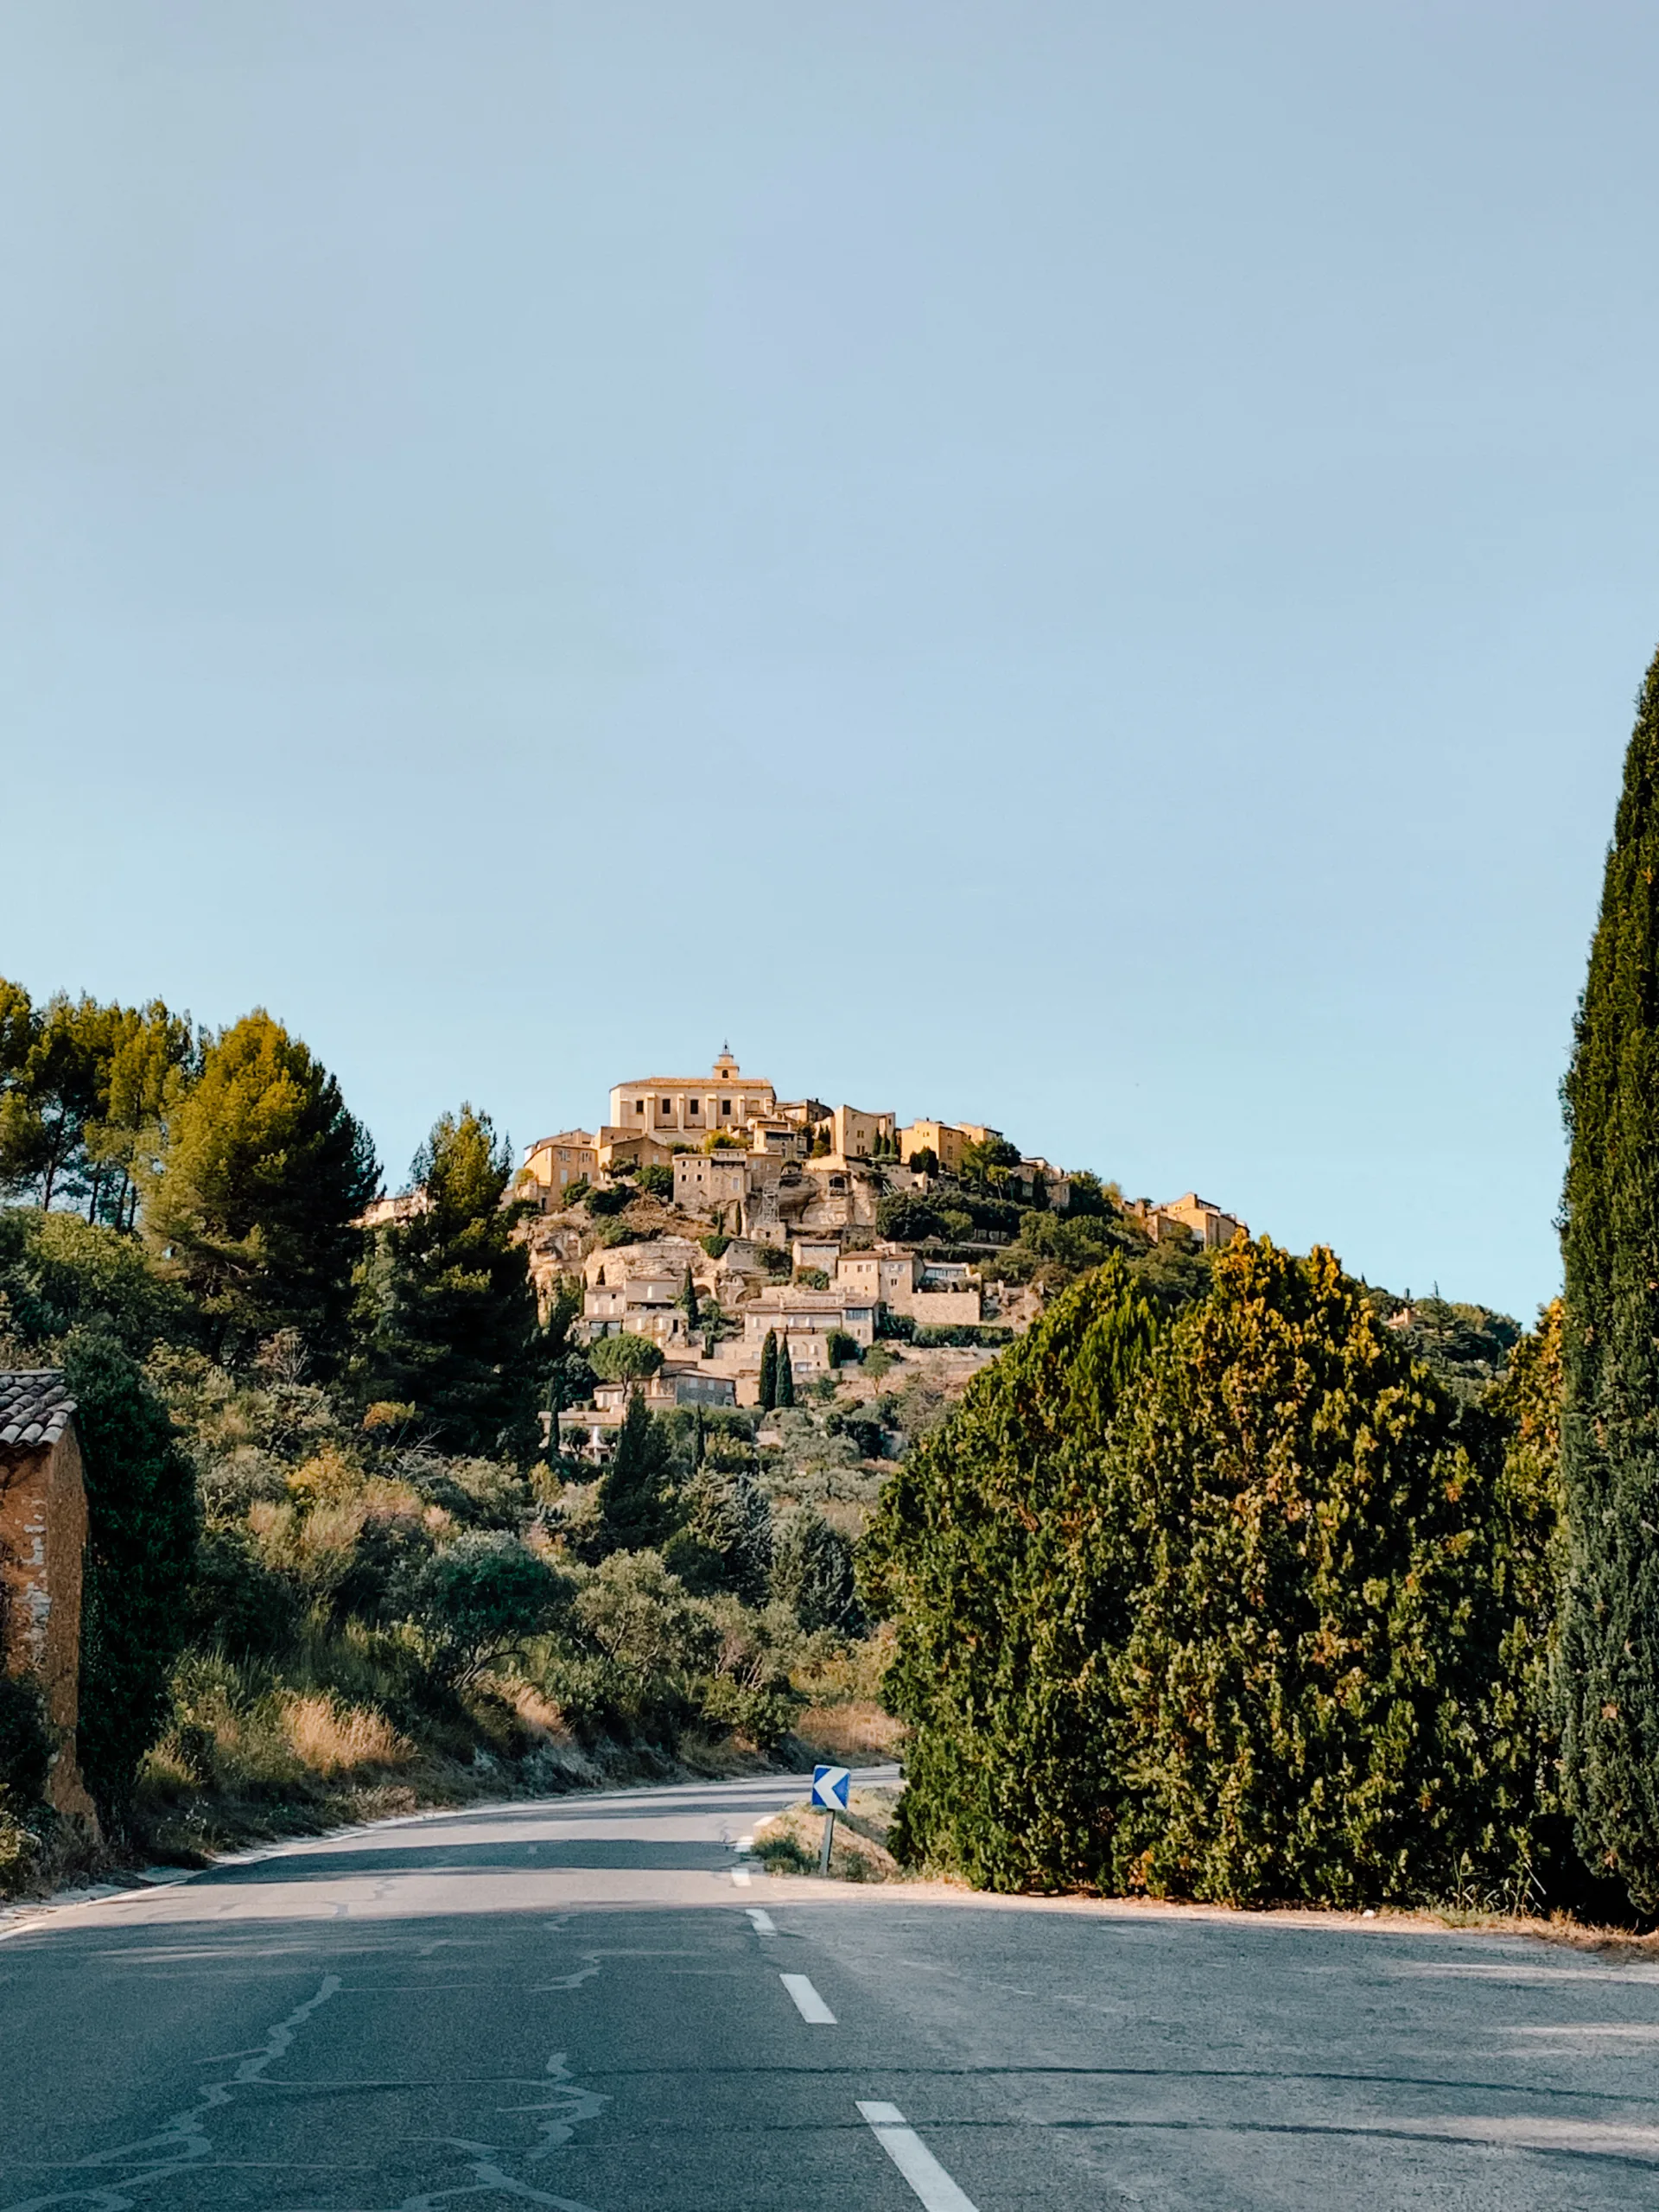 A town on a hillside sits in the middle with the road leading up to it with trees and bushes lining the road. 